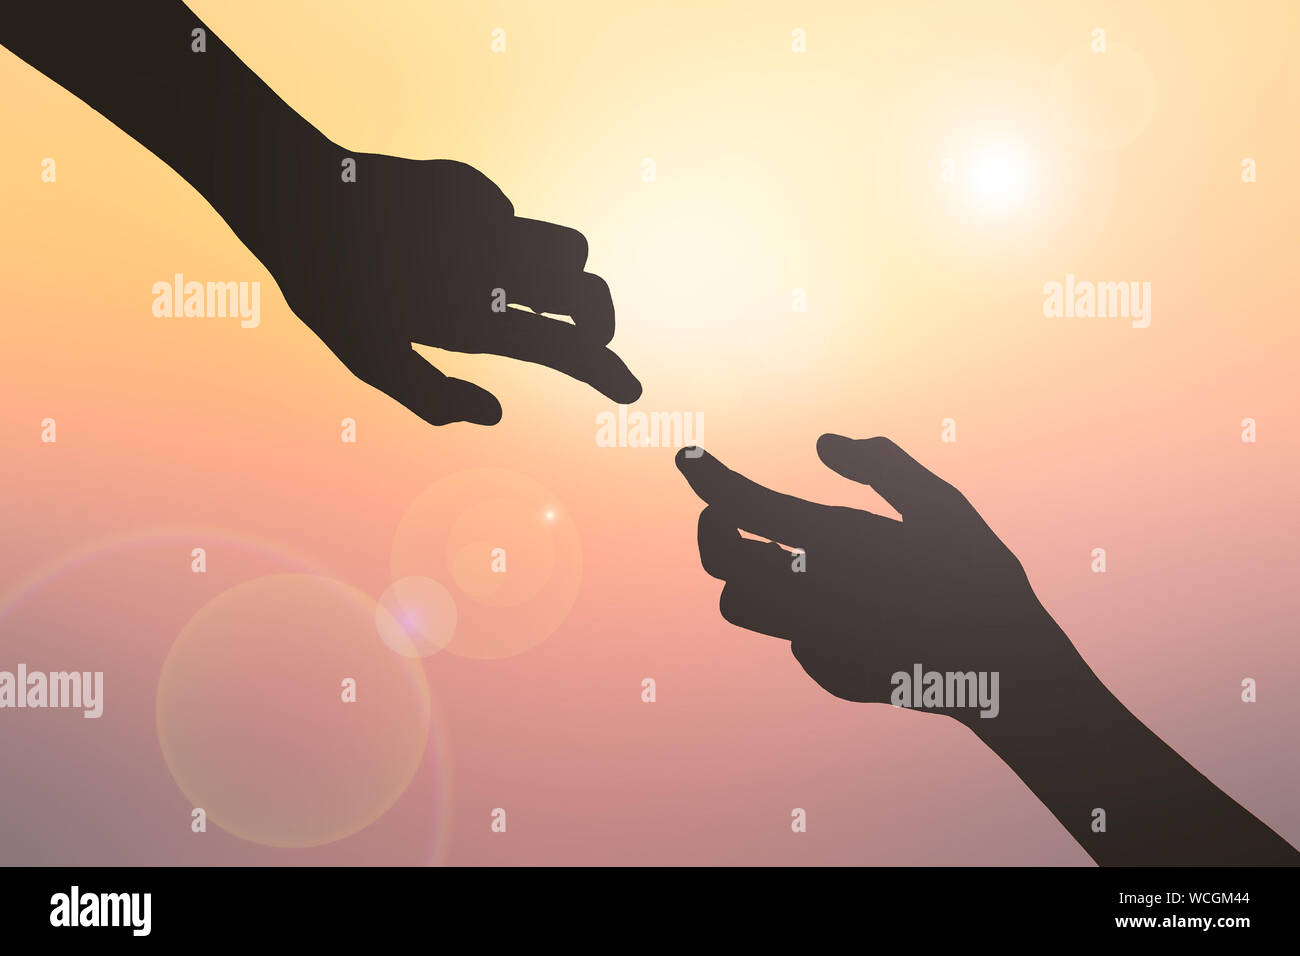 Cropped Image Of Silhouette Hands Against Shining Sun During Sunset Stock Photo